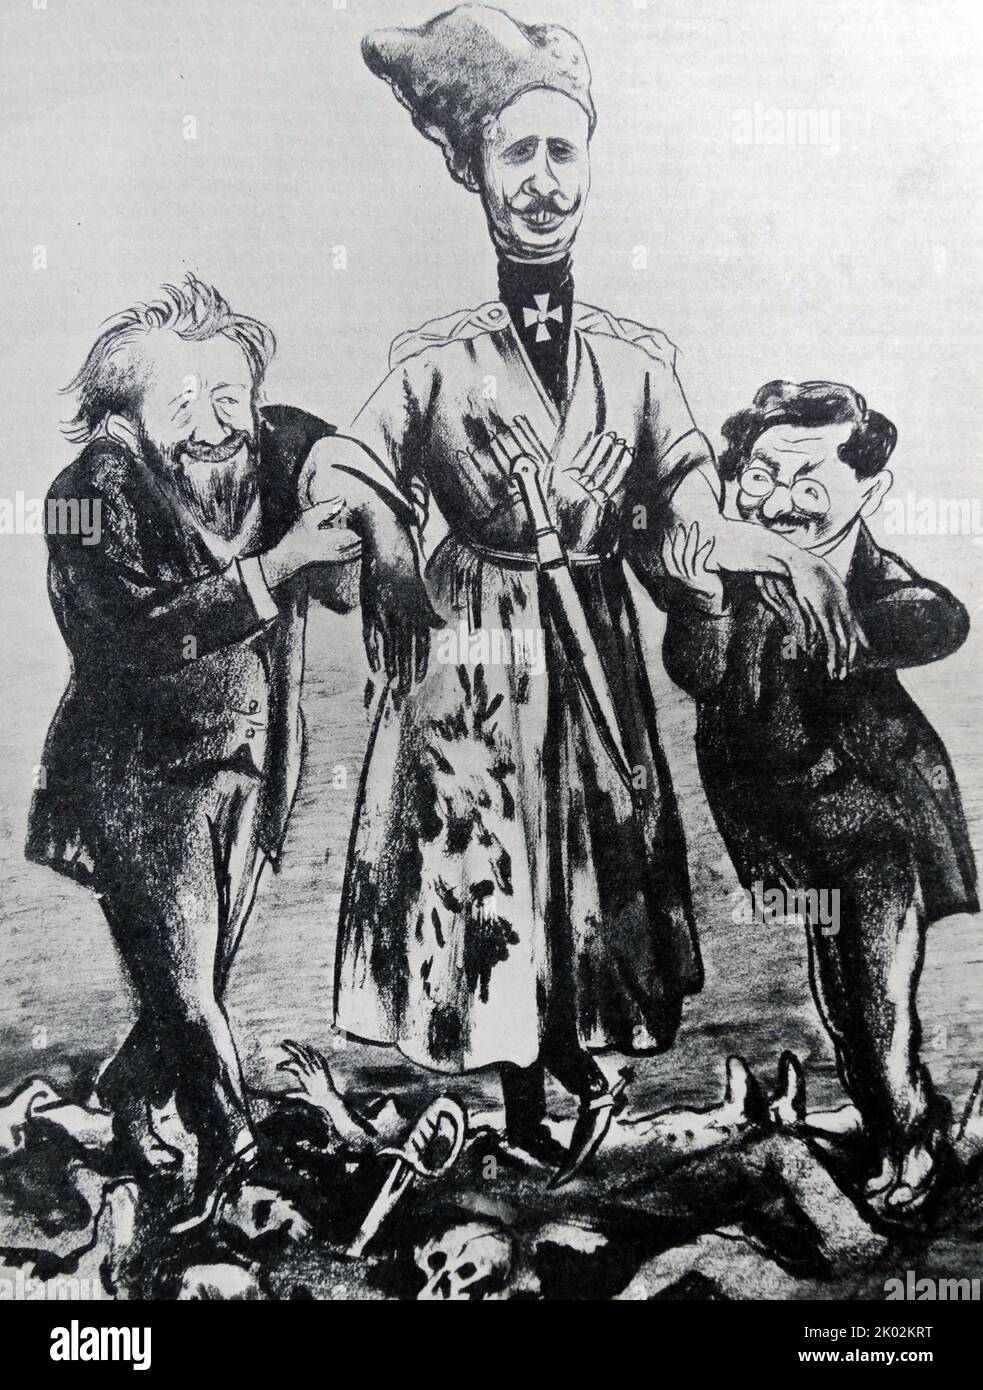 To help General Polovtsov to restore and support the revolutionary order in Petrograd, the Compromisers assigned two Social Revolutionaries -- Avksentiev and Gots. Caricature by Kukryniksy. Pyotr Polovtsov 1874 - , 1964); Russian military leader, military orientalist, lieutenant general , author of a number of military oriental studies. Stock Photo